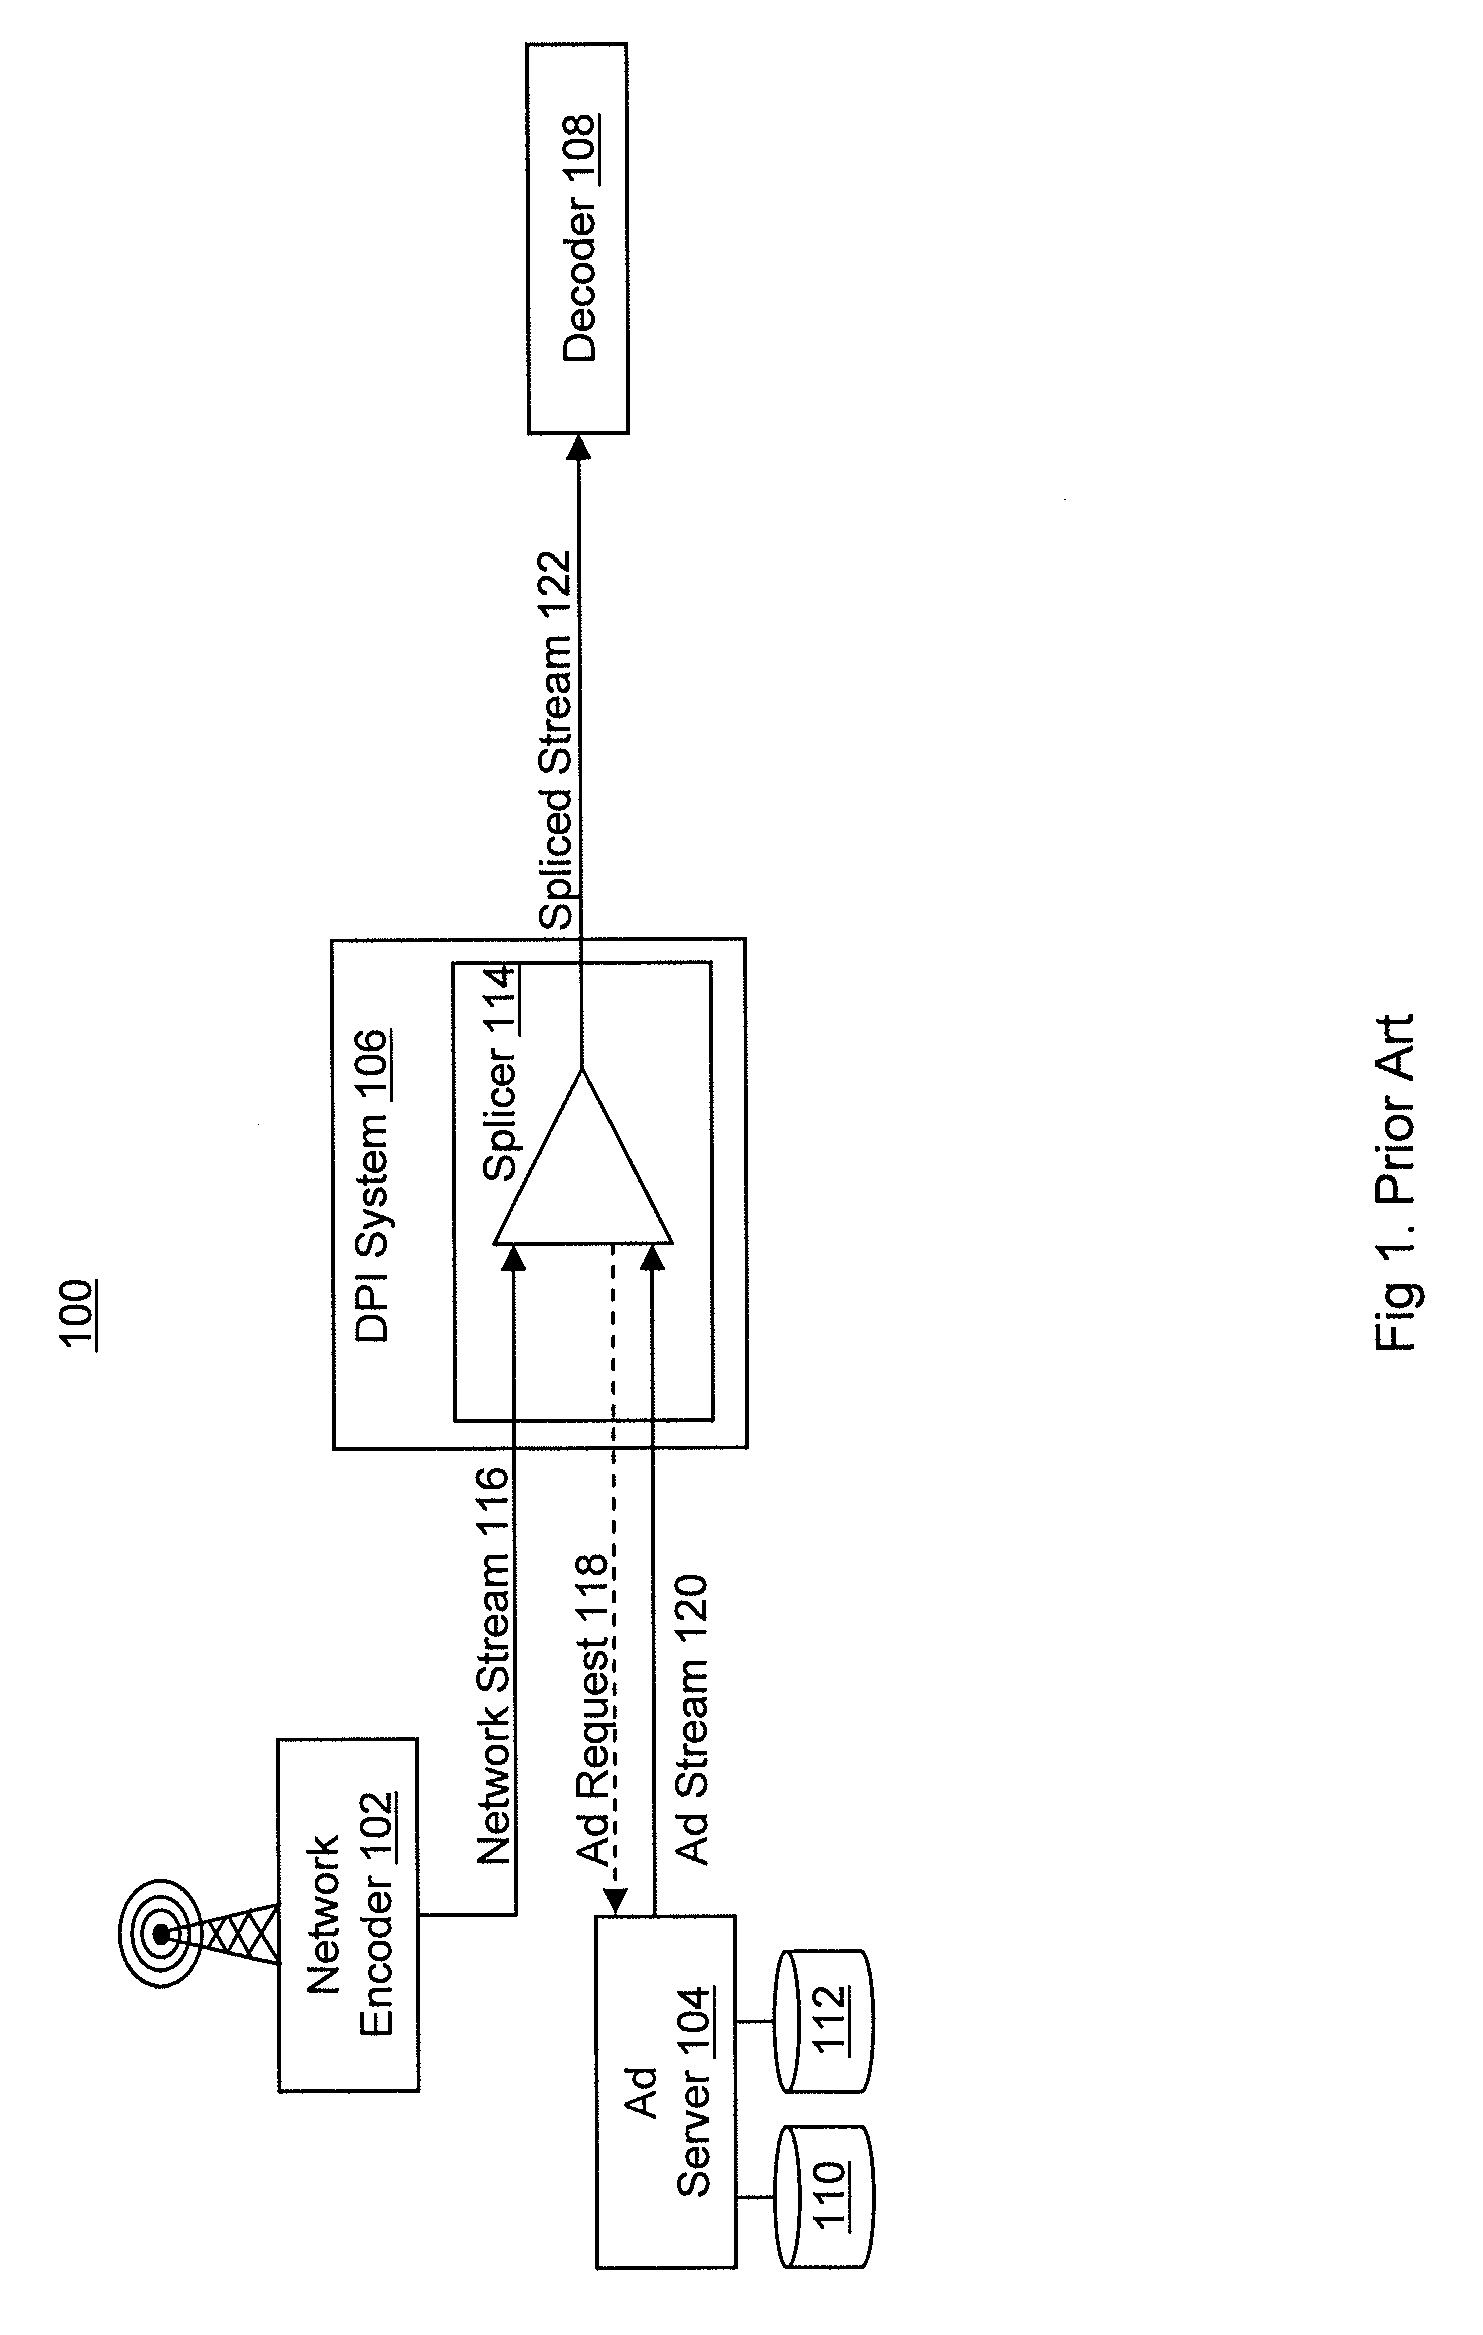 Dynamic rate adjustment to splice compressed video streams